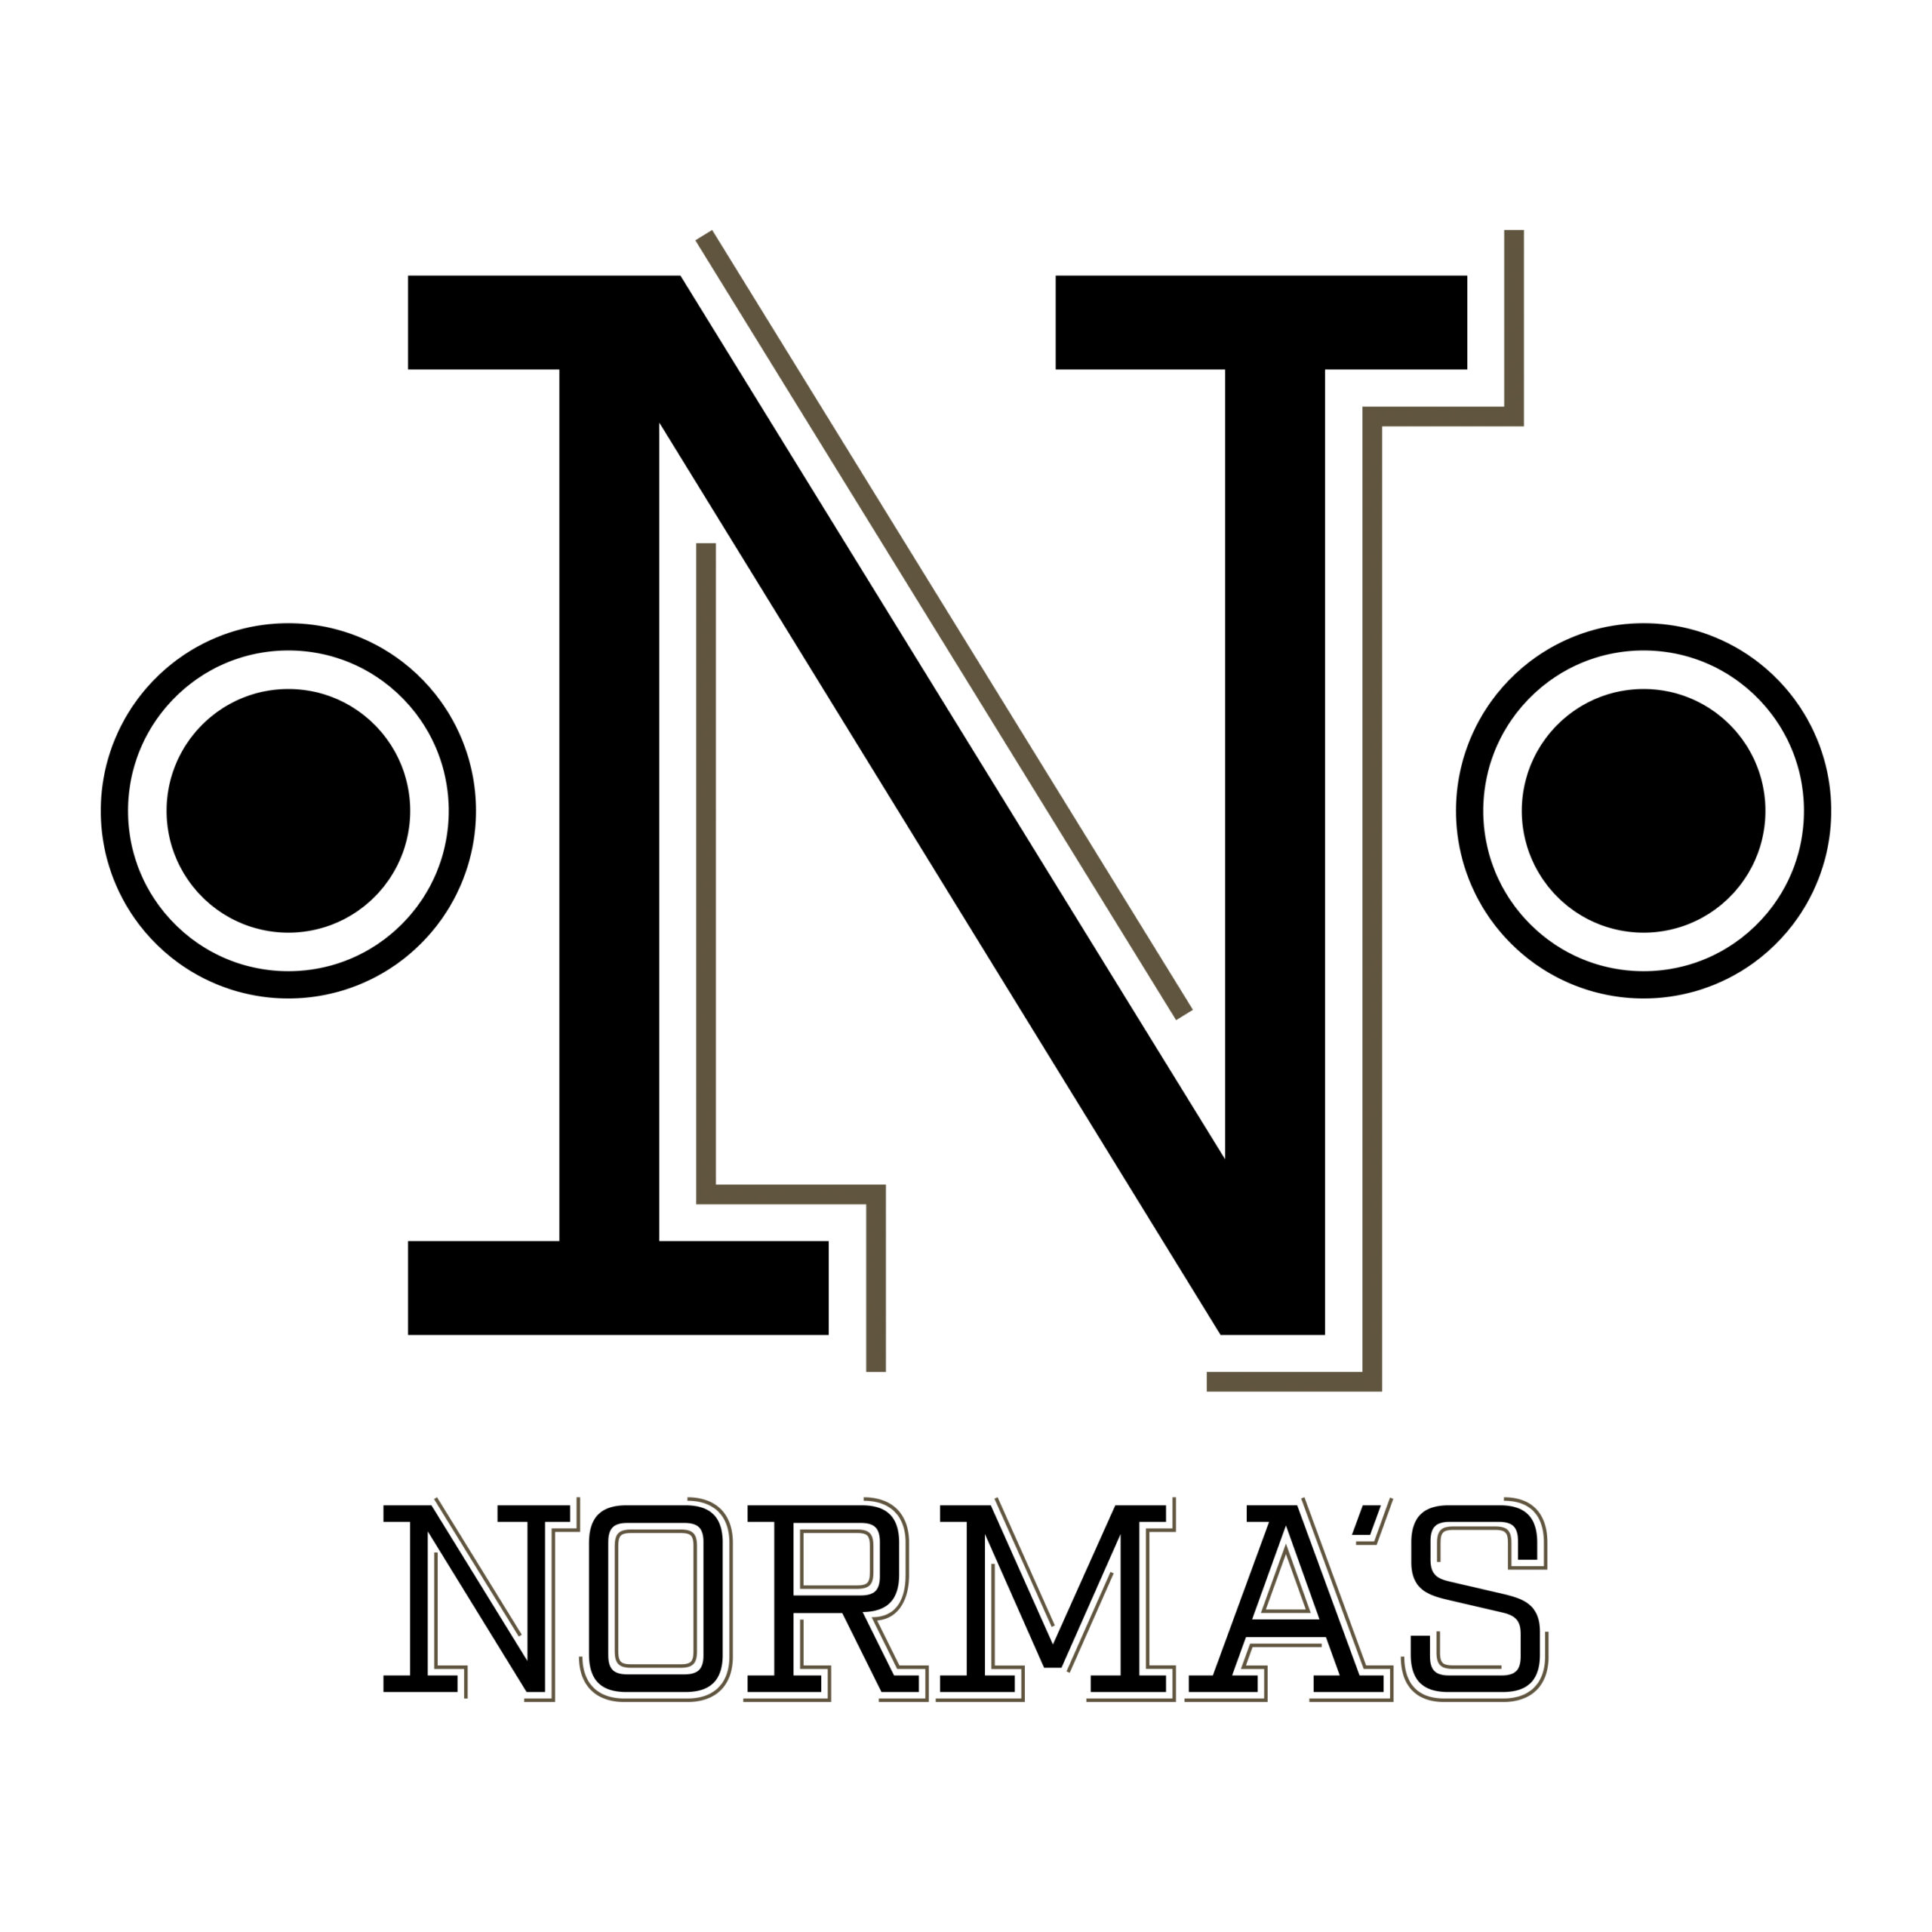 Norma's